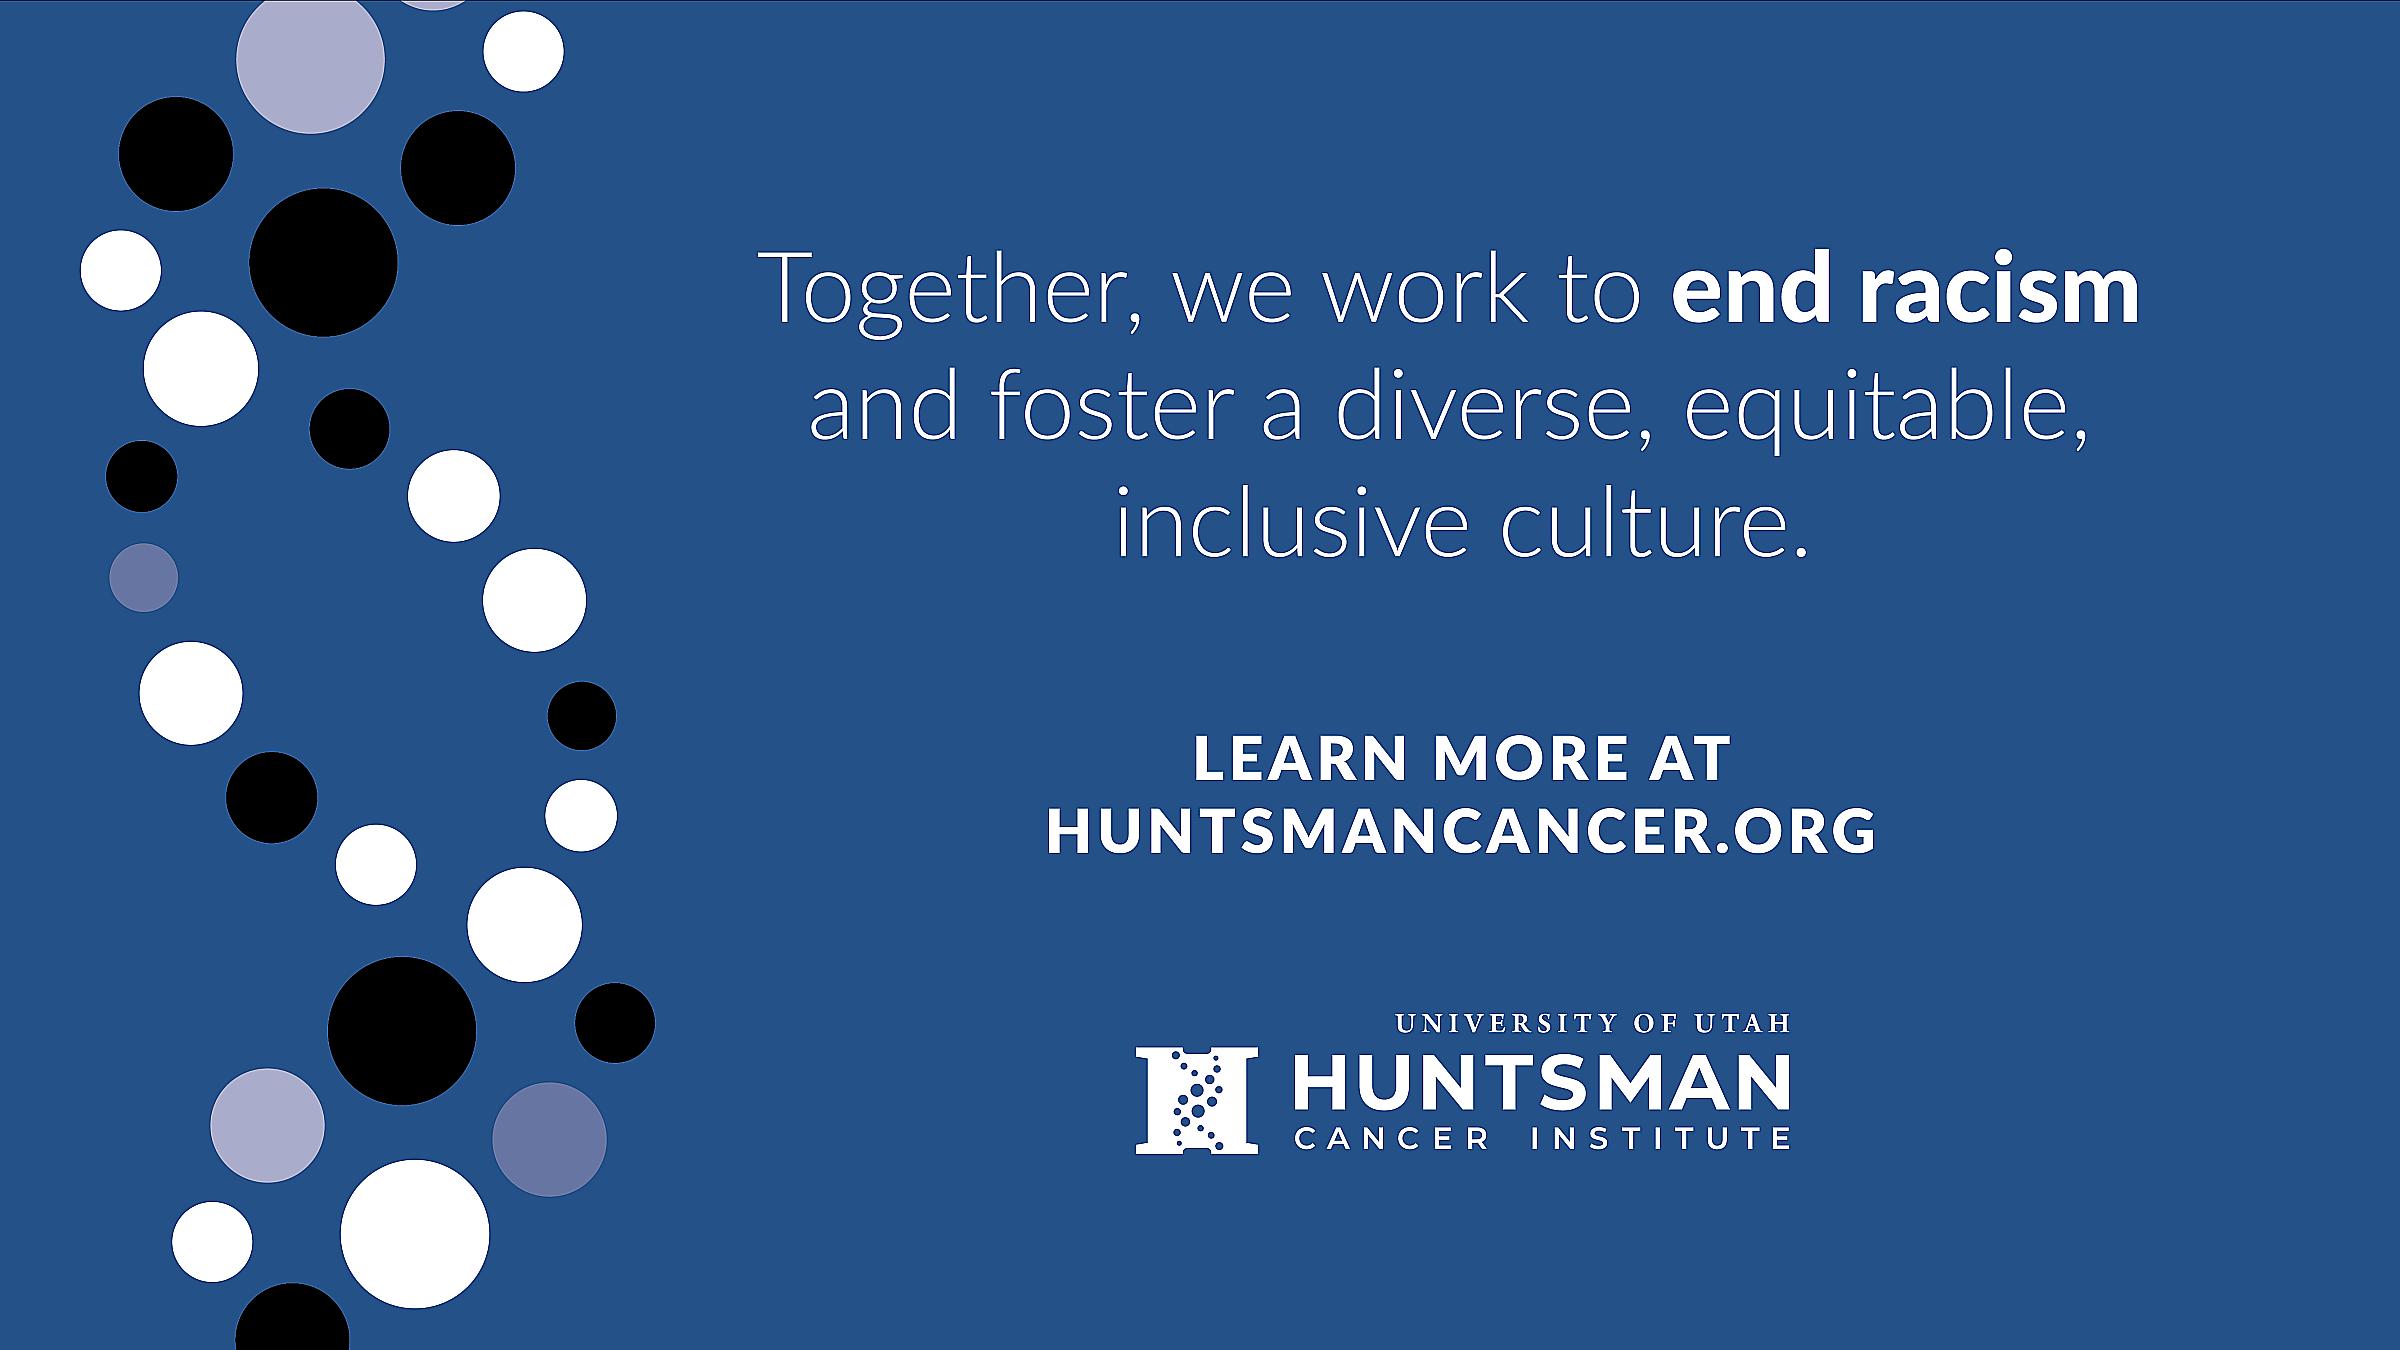 Helix made out of circles on a blue background with the text "Together, we work to end racism and foster a diverse, equitable, inclusive culture. Learn more at huntsmancancer.org"